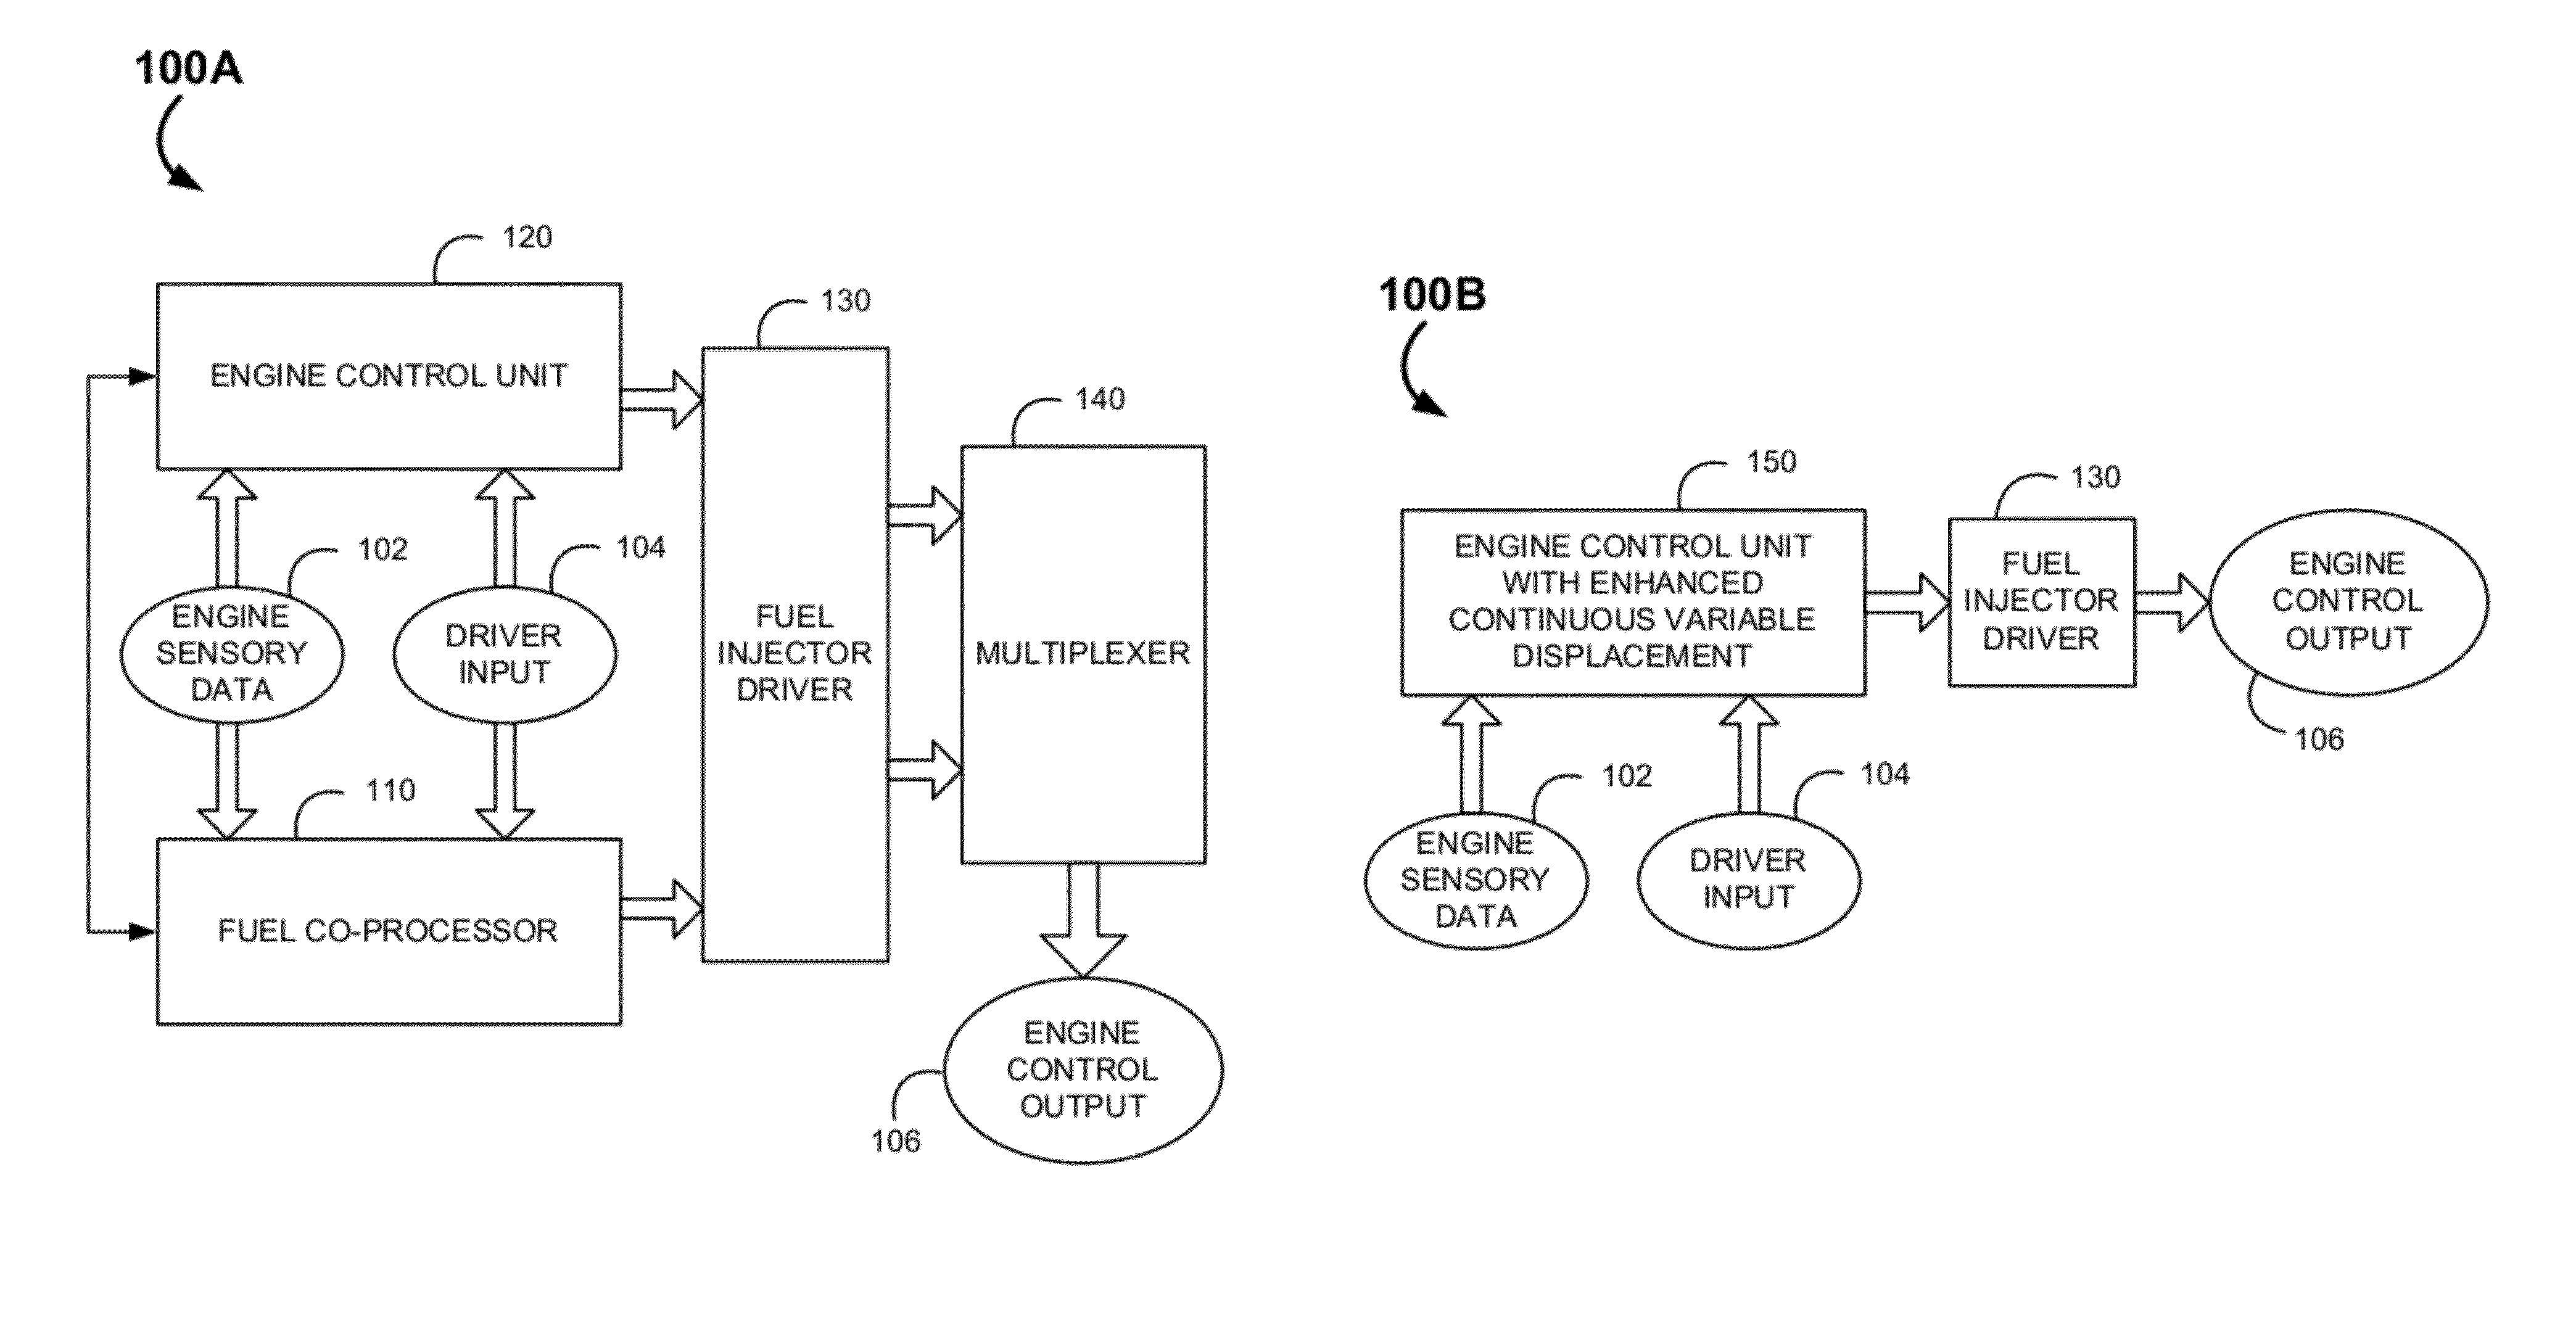 System and methods for improving efficiency in internal combustion engines